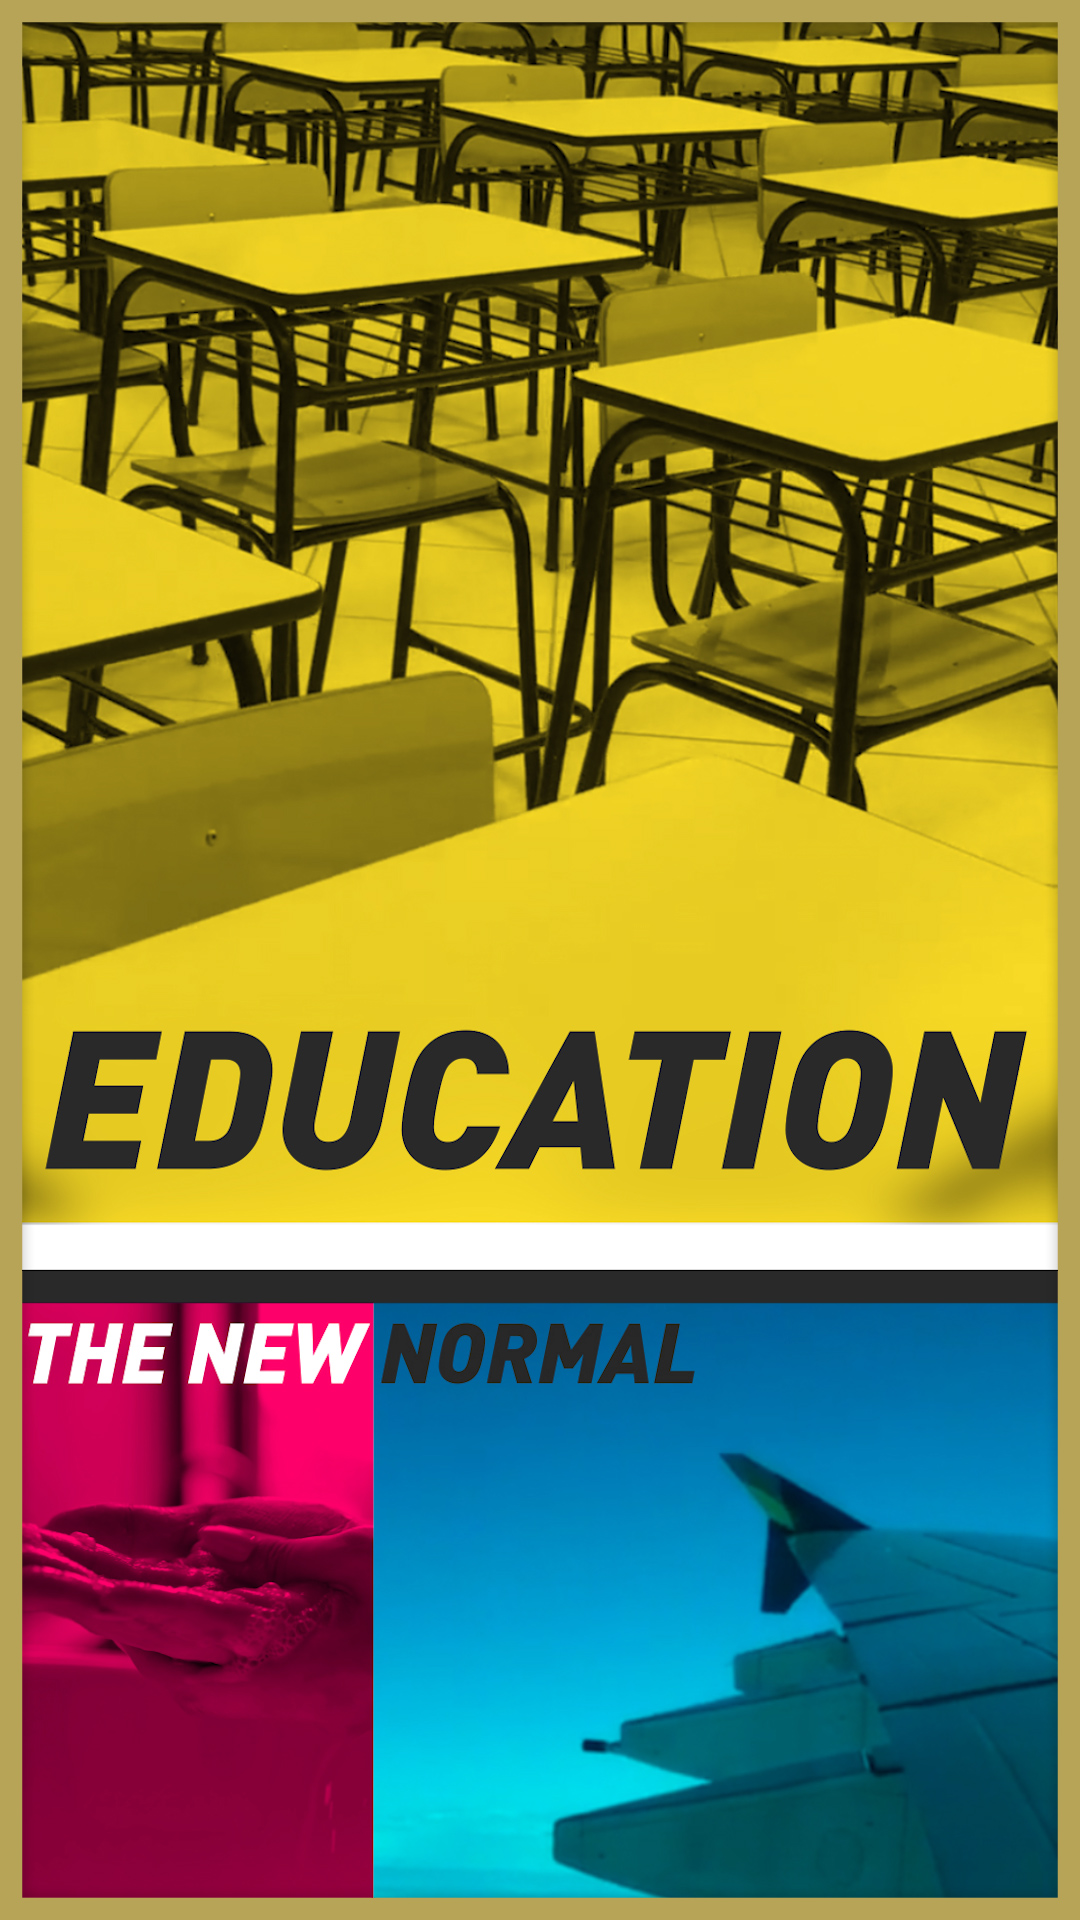 new normal system in education essay